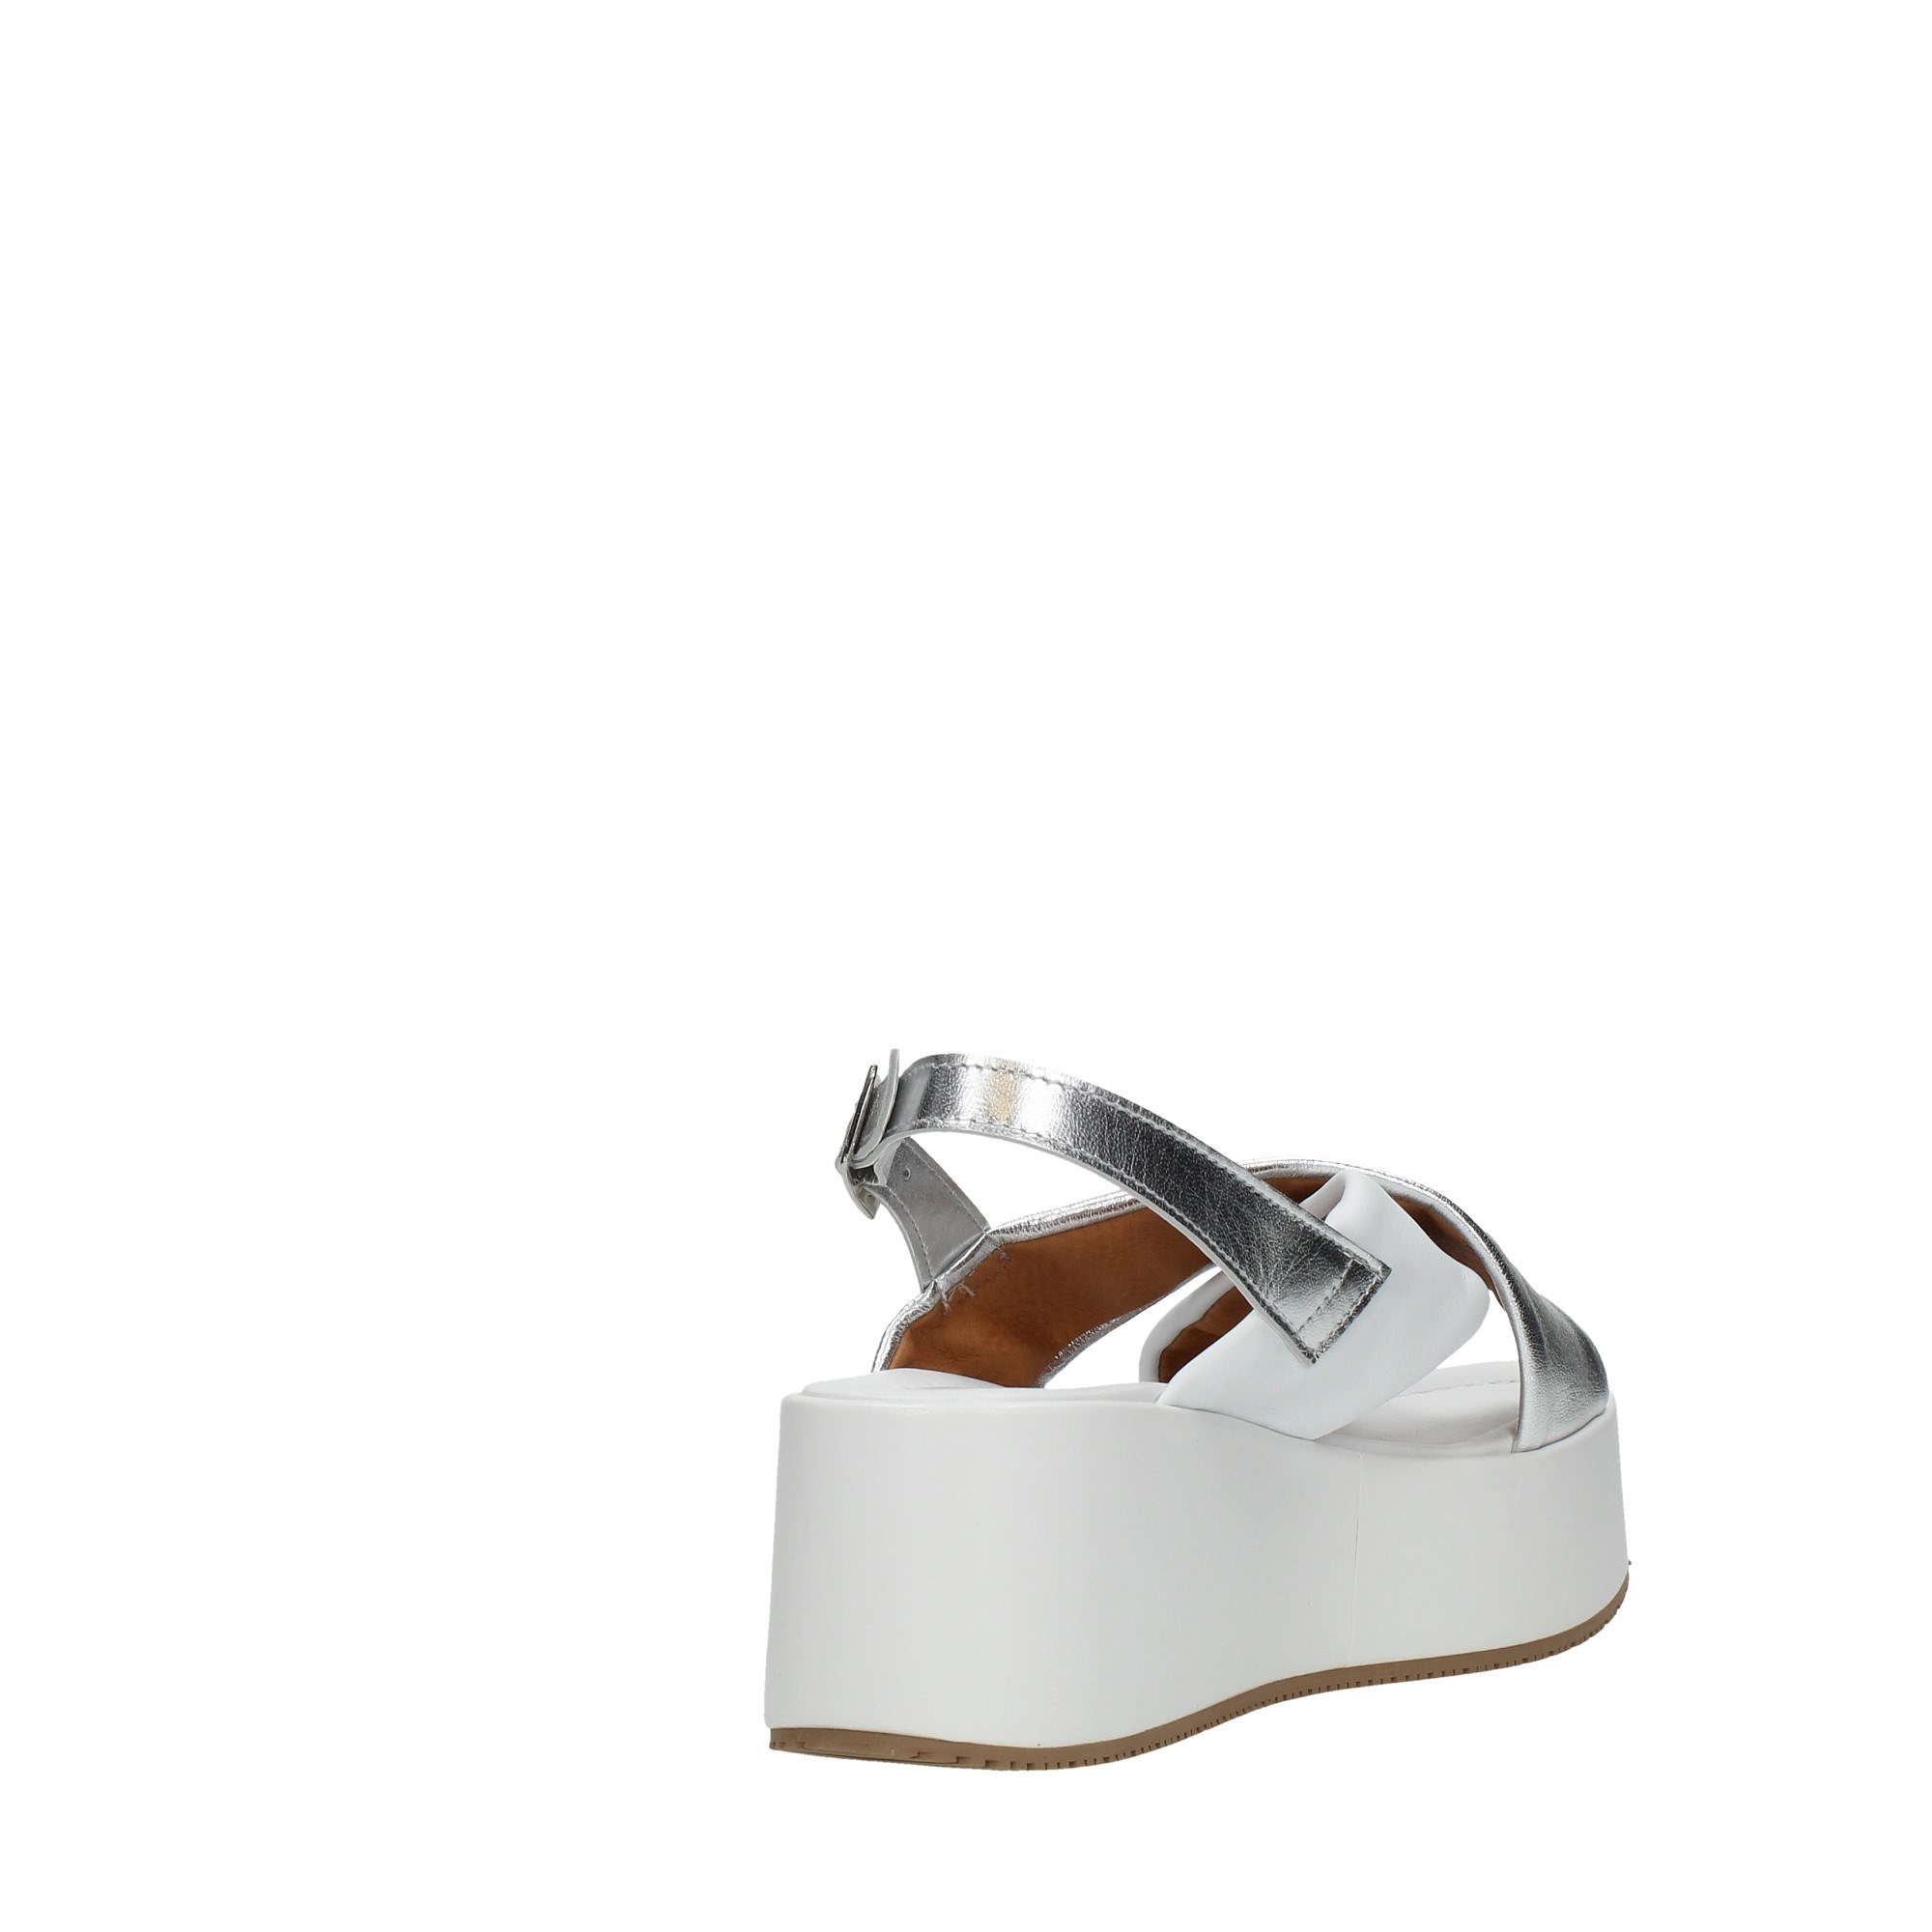 Elisa Conte Shoes Women Wedge Sandals White VALERY